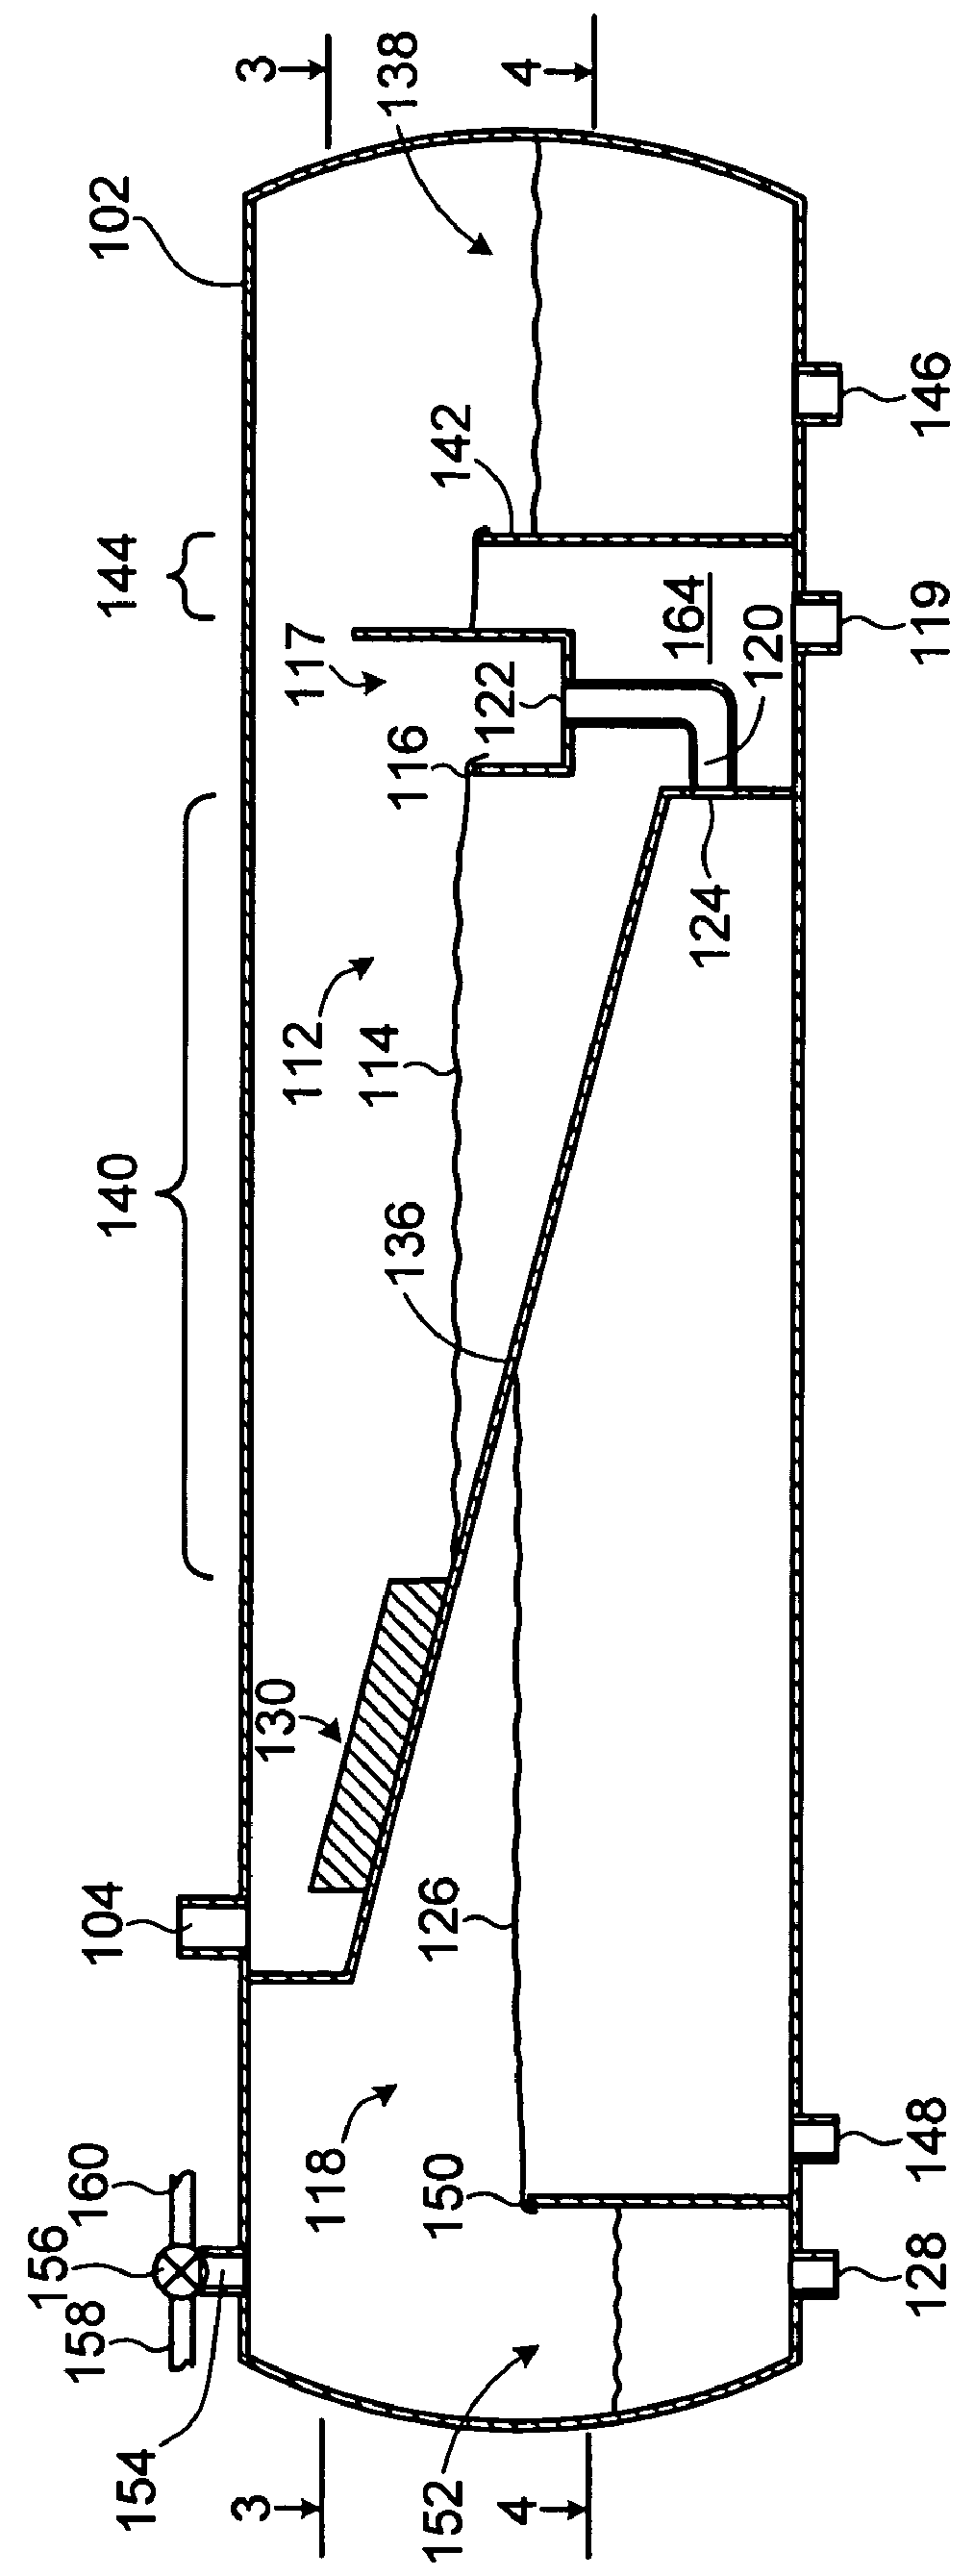 Process and apparatus for treating a heavy hydrocarbon feedstock